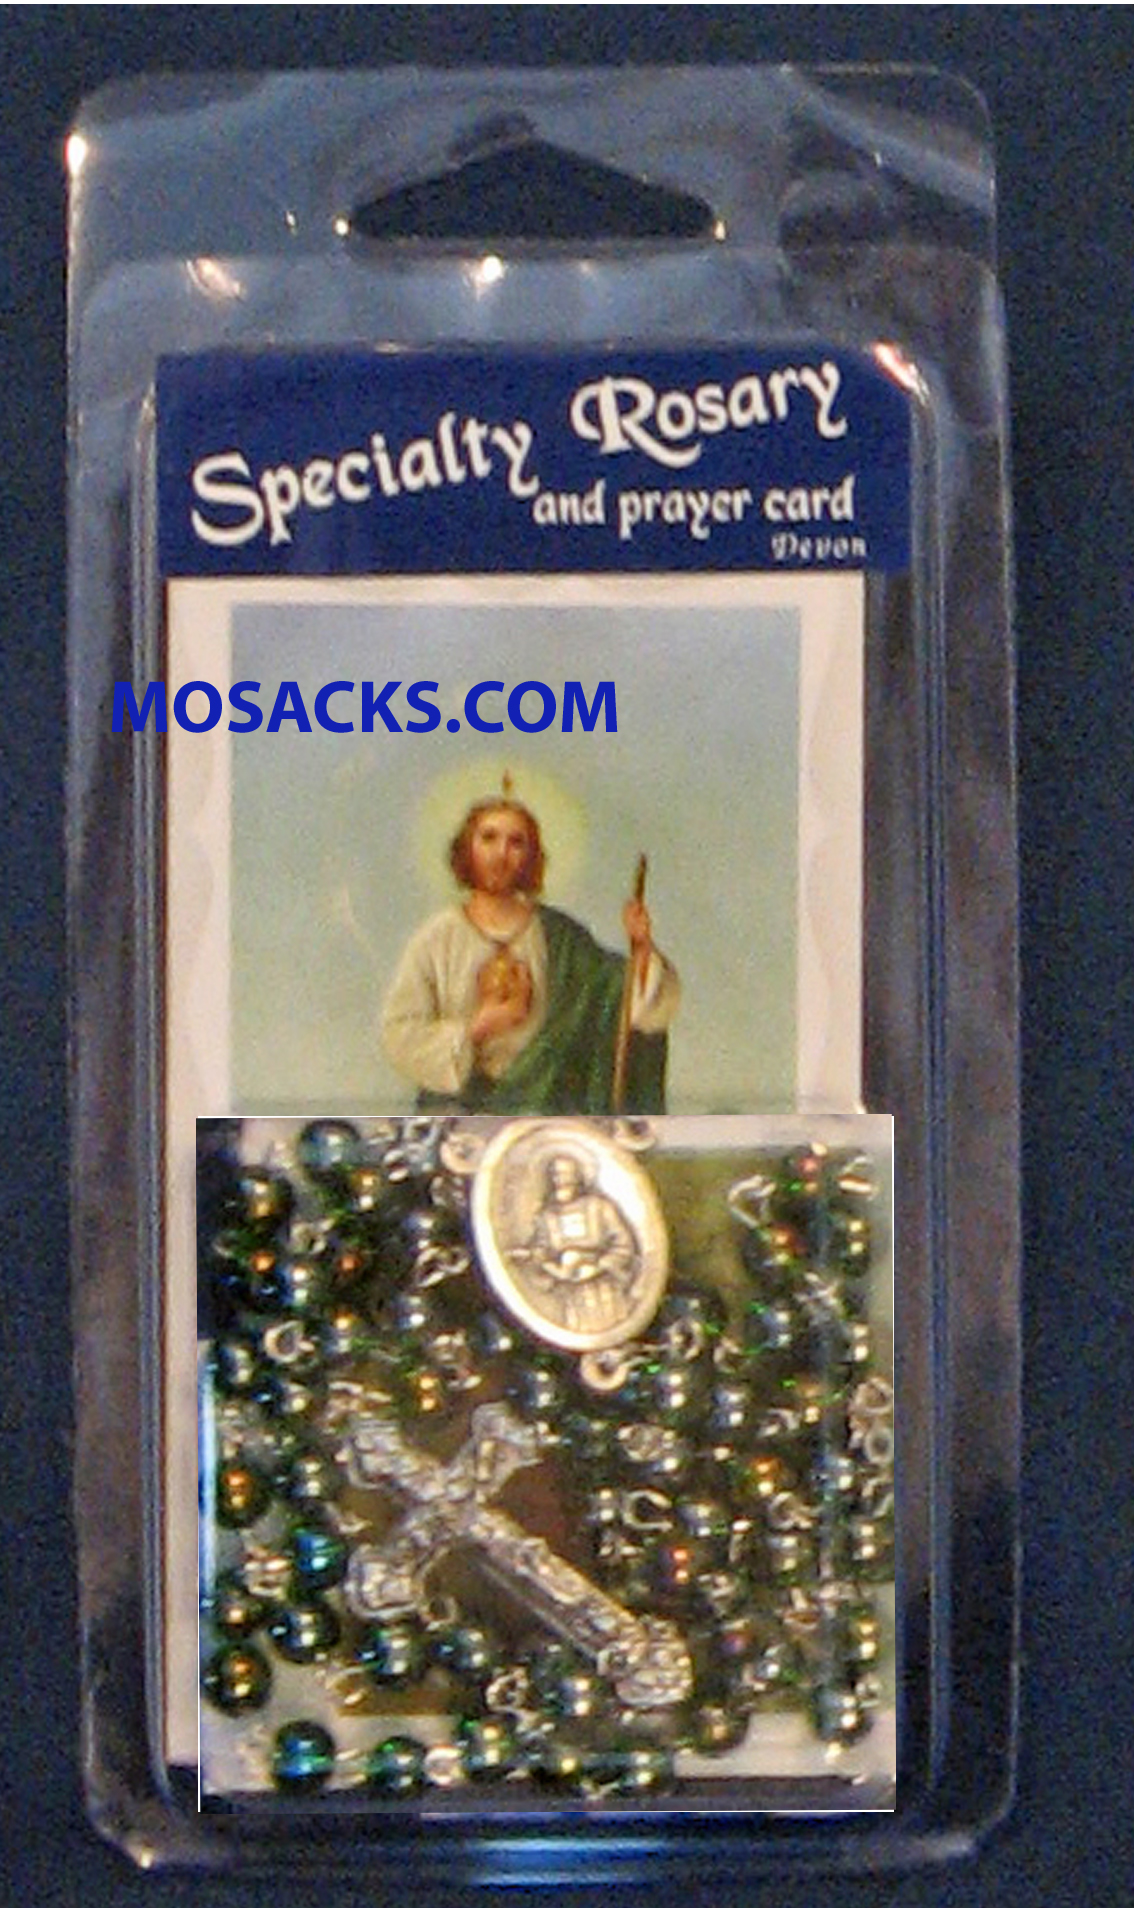 Specialty Rosary St. Jude Rosary and St. Jude Prayer Card 64-967/JUD/C1 is a 17” Green Round Bead St. Jude Rosary with St Jude Joiner